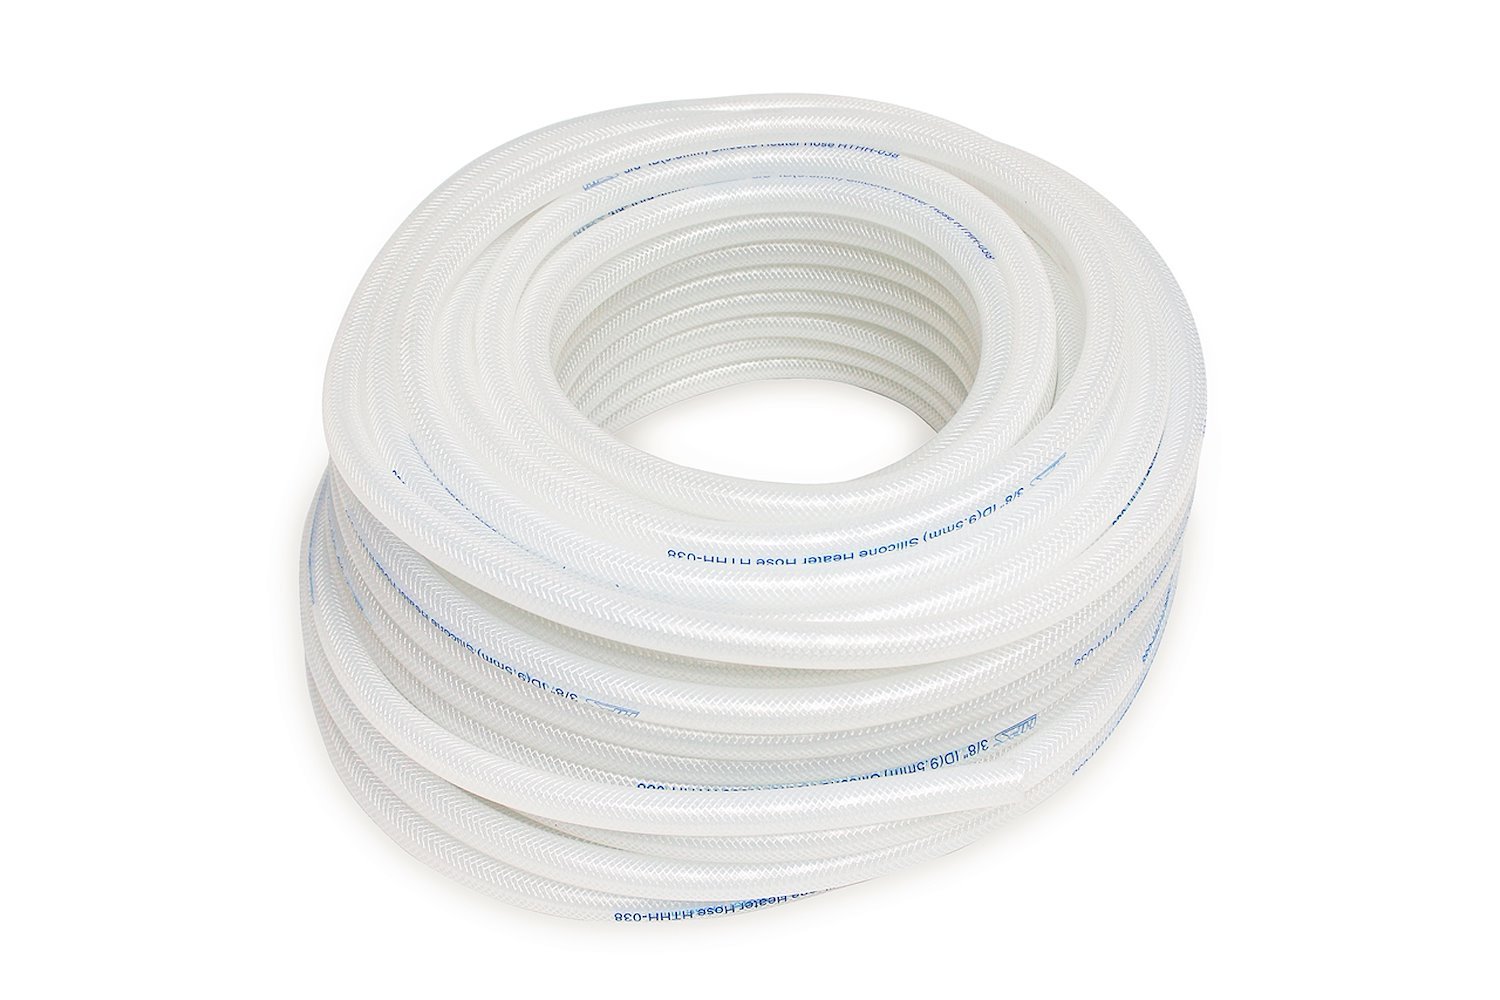 HTHH-087-CLEARx25 Silicone Heater Hose Tubing, High-Temp Reinforced, 7/8 in. ID, 25 ft. Roll, Clear